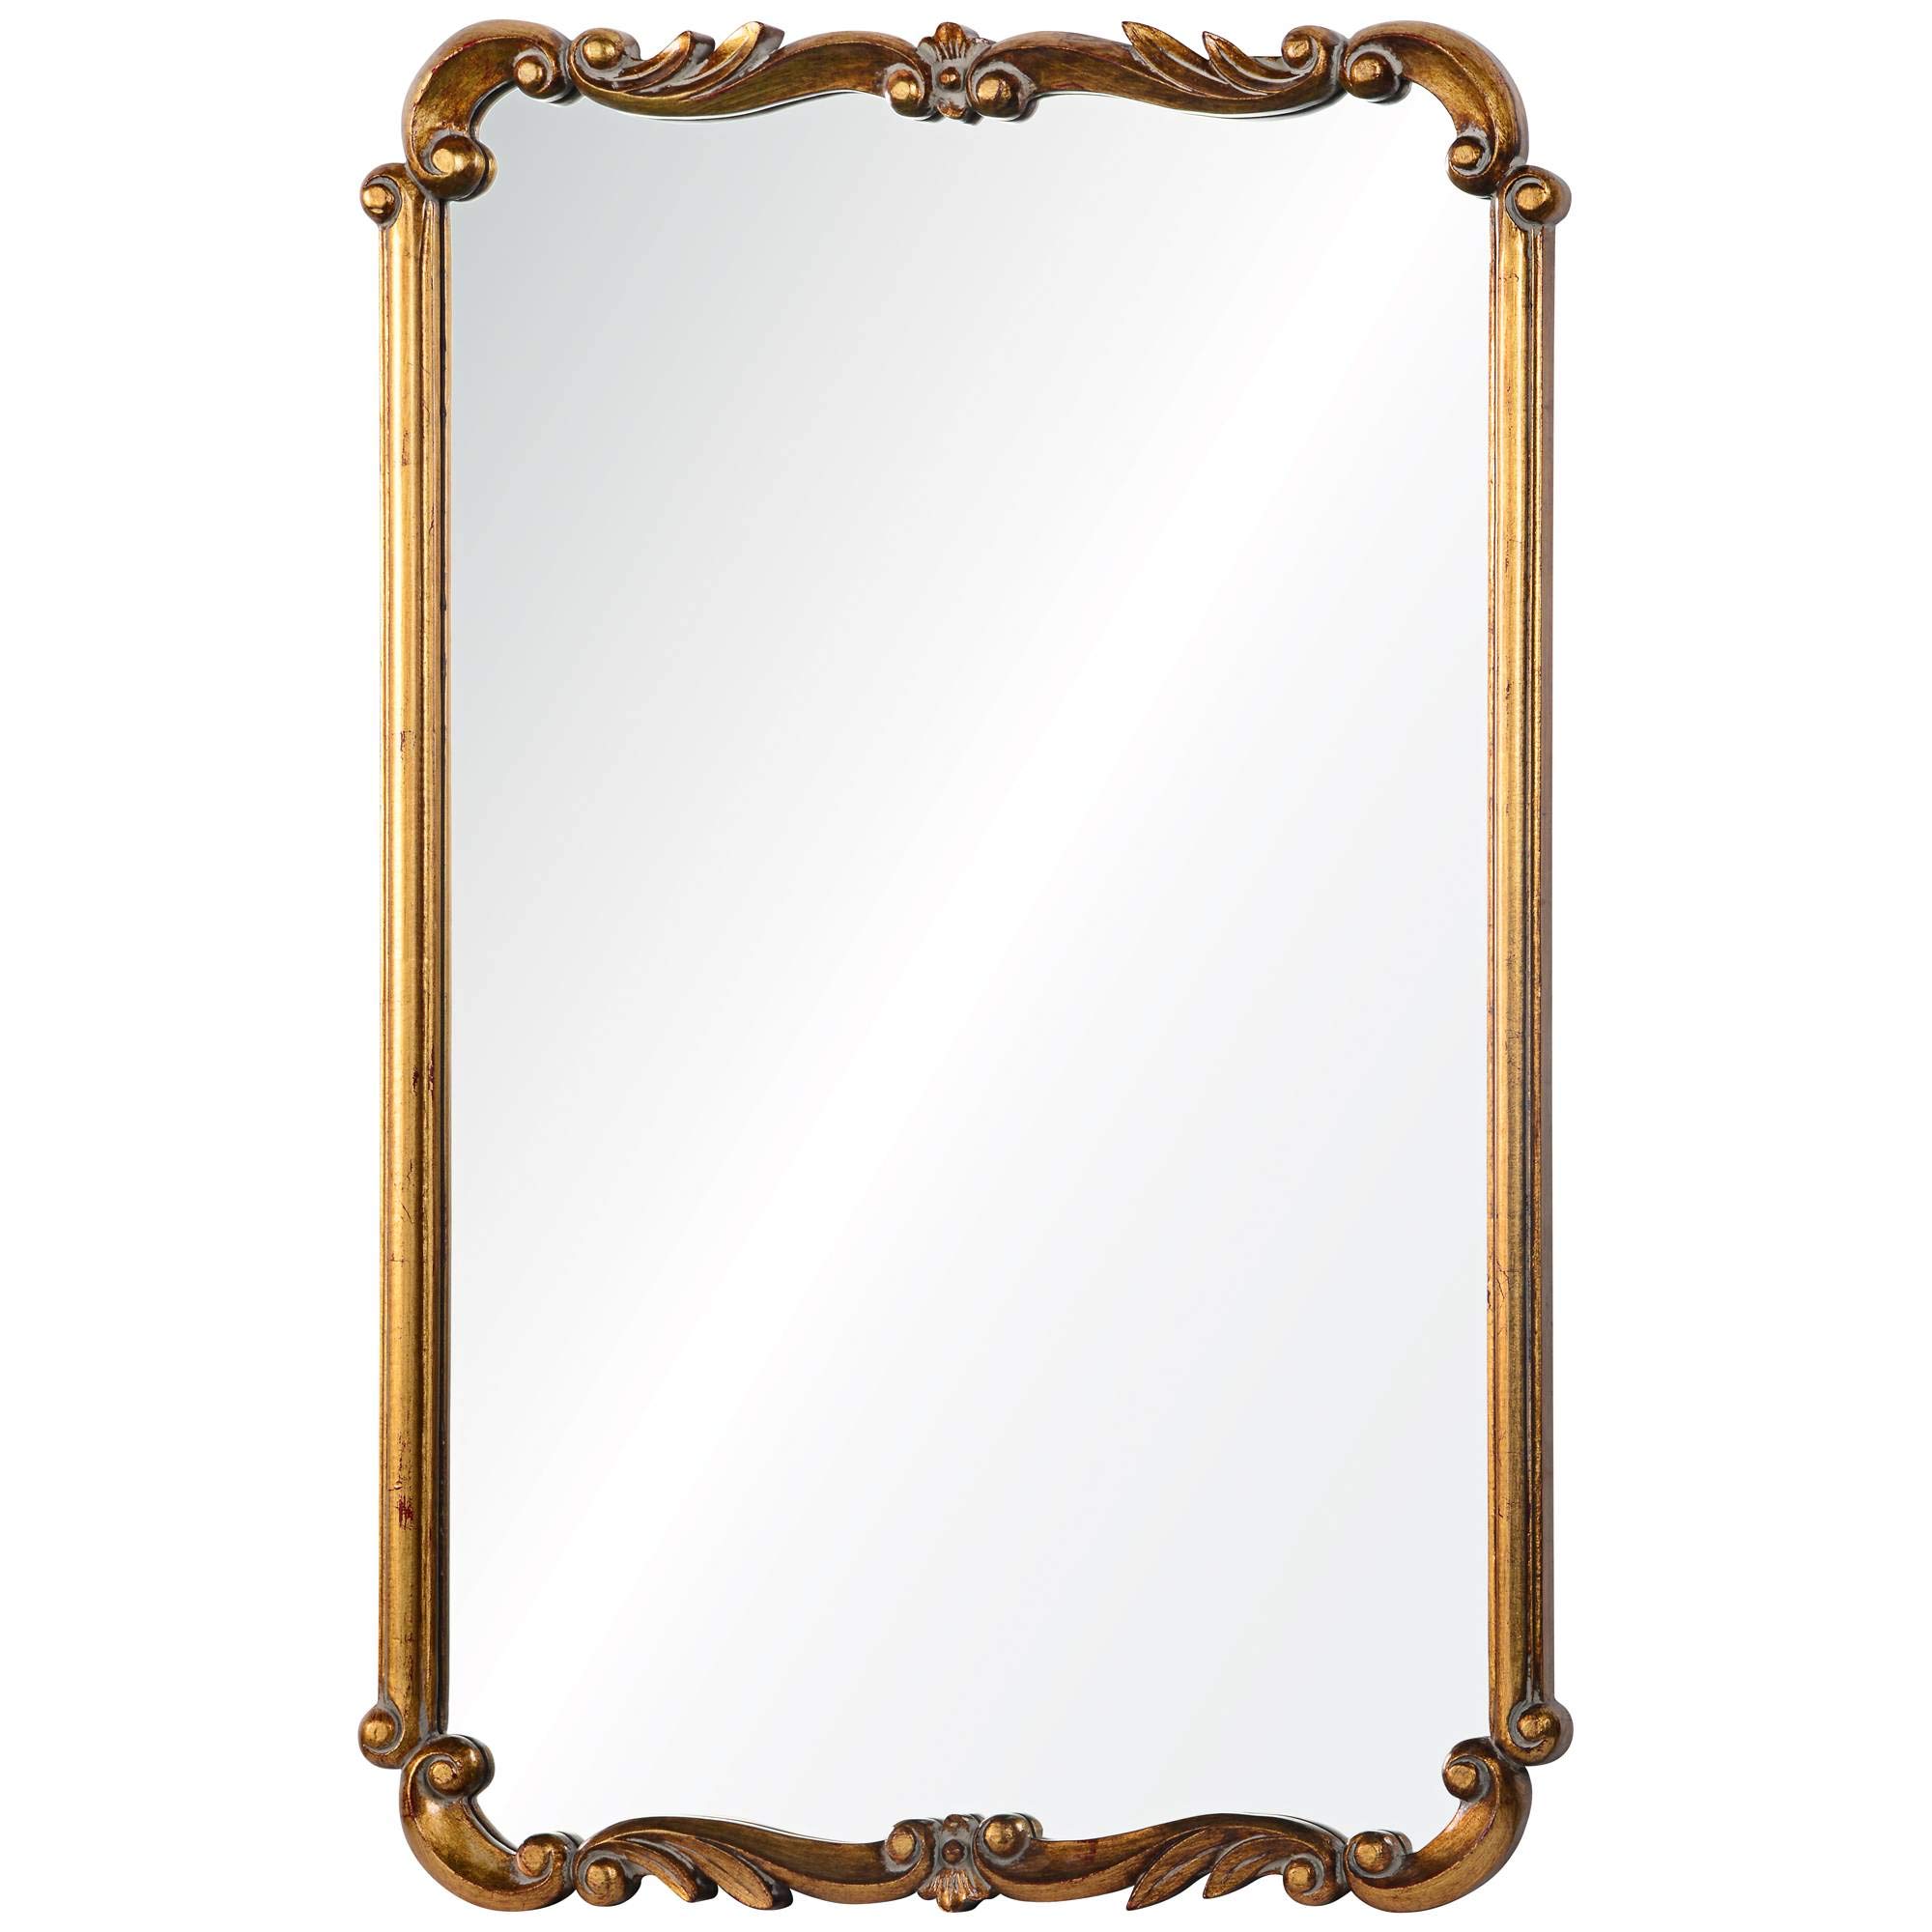 Cooper Classics Toulouse Gold 24 1/2" x 36" Rectangular Wall Mirror